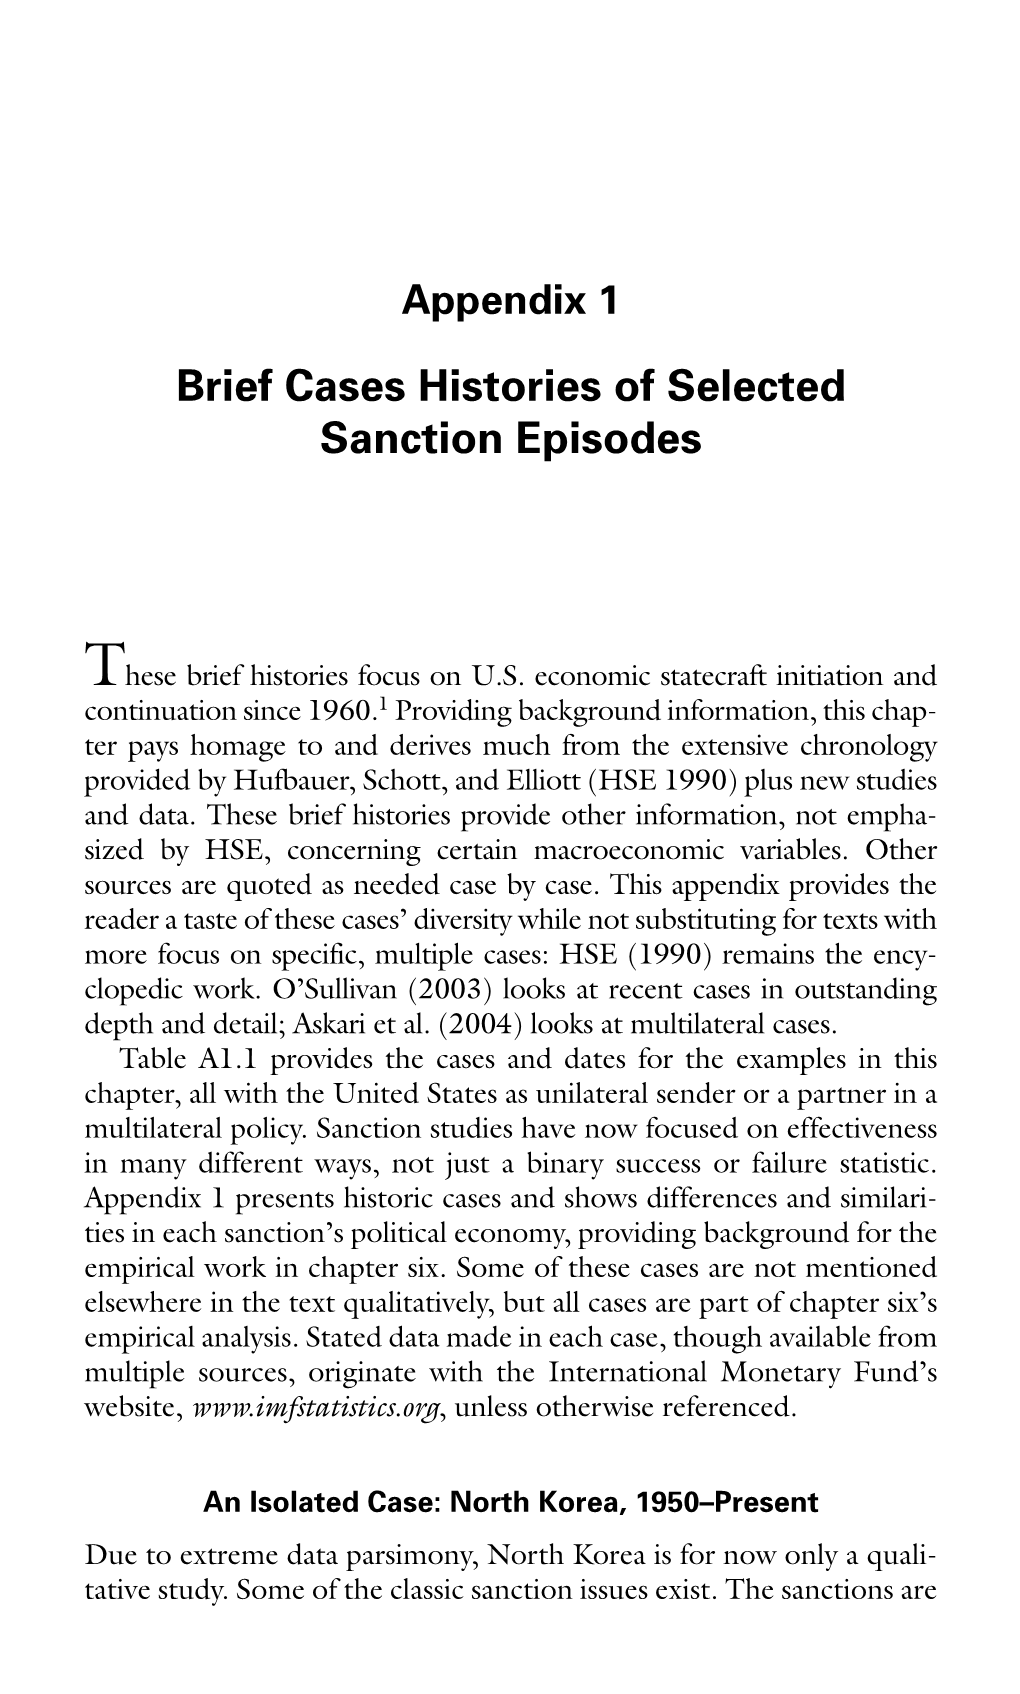 Brief Cases Histories of Selected Sanction Episodes